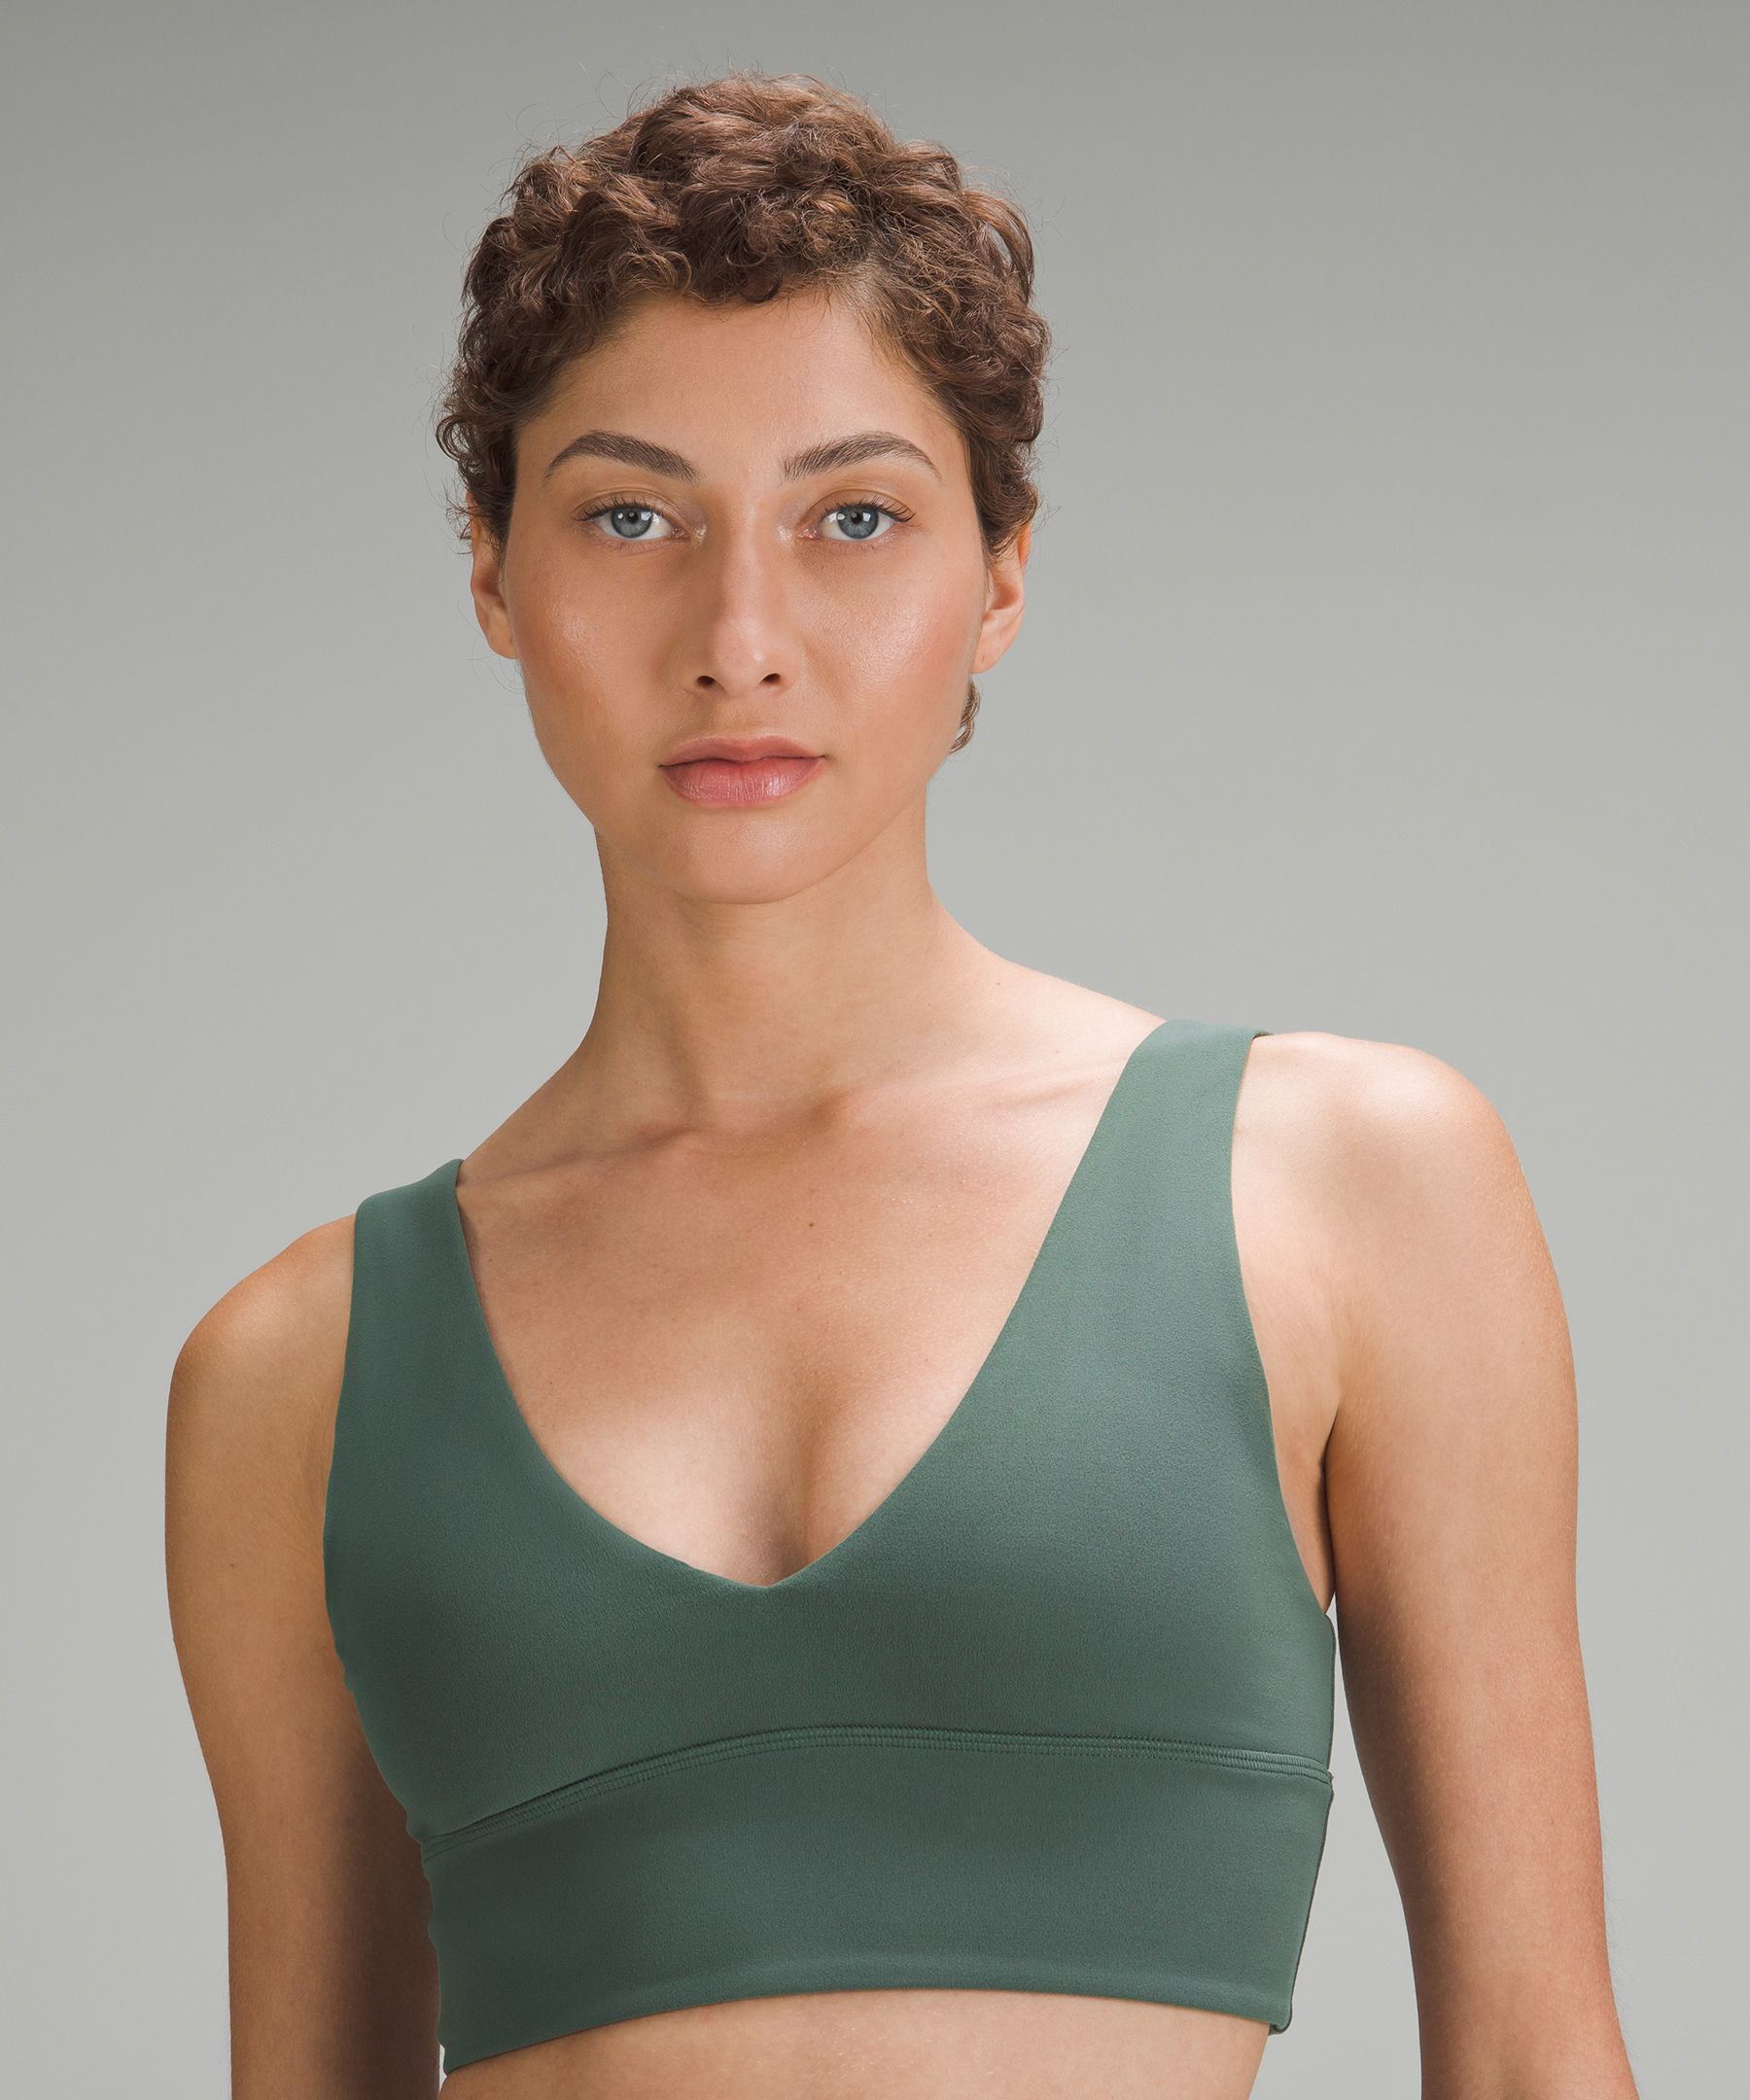 lululemon - The bra that has it all–a classic v-shaped neckline